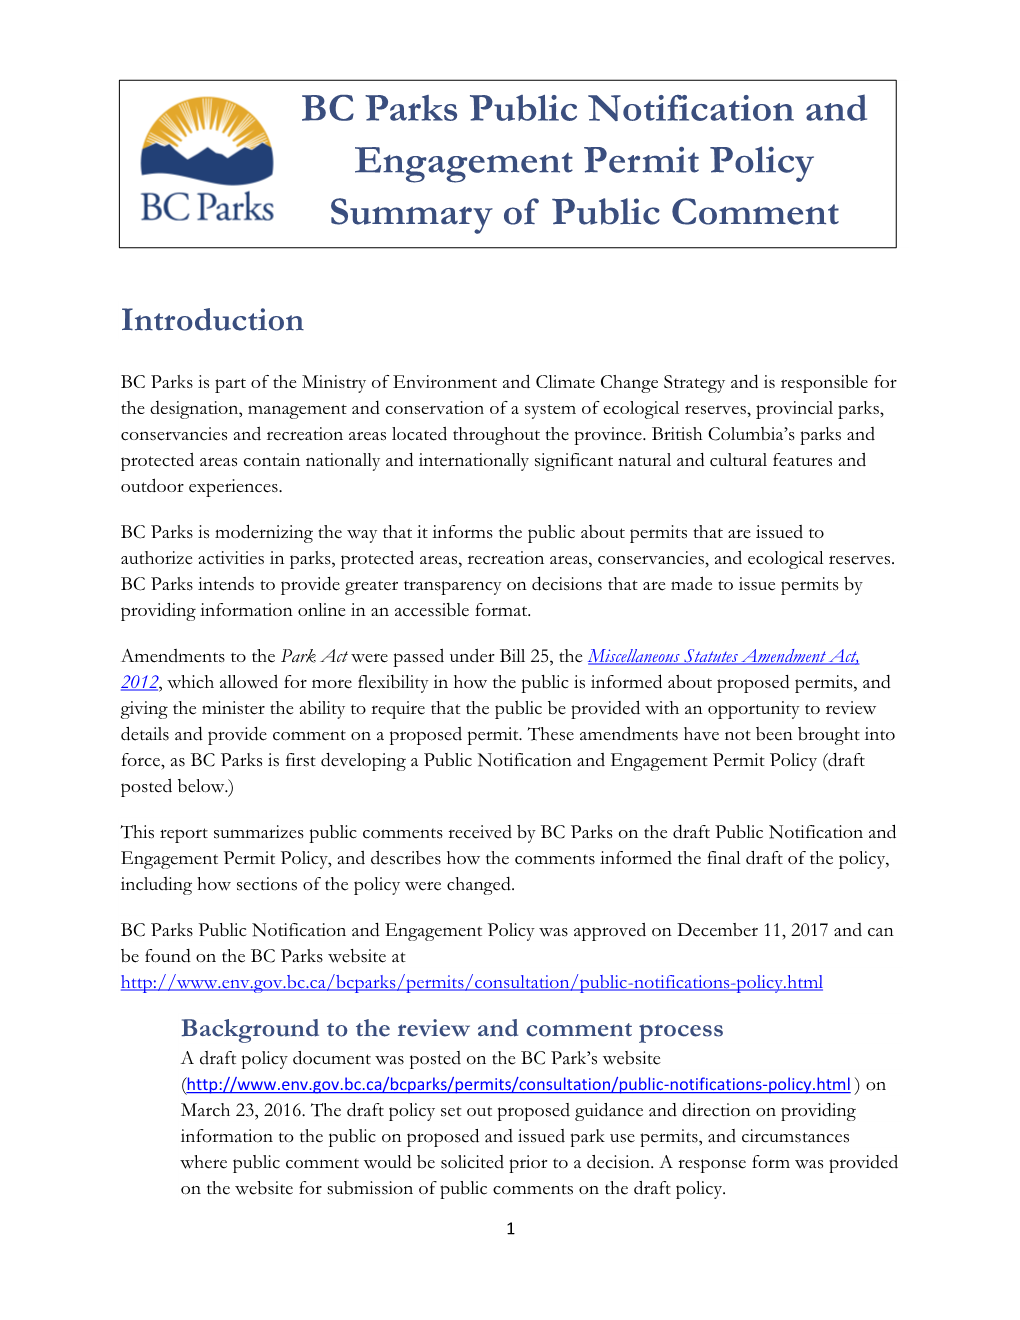 BC Parks Public Notification and Engagement Permit Policy Summary of Public Comment